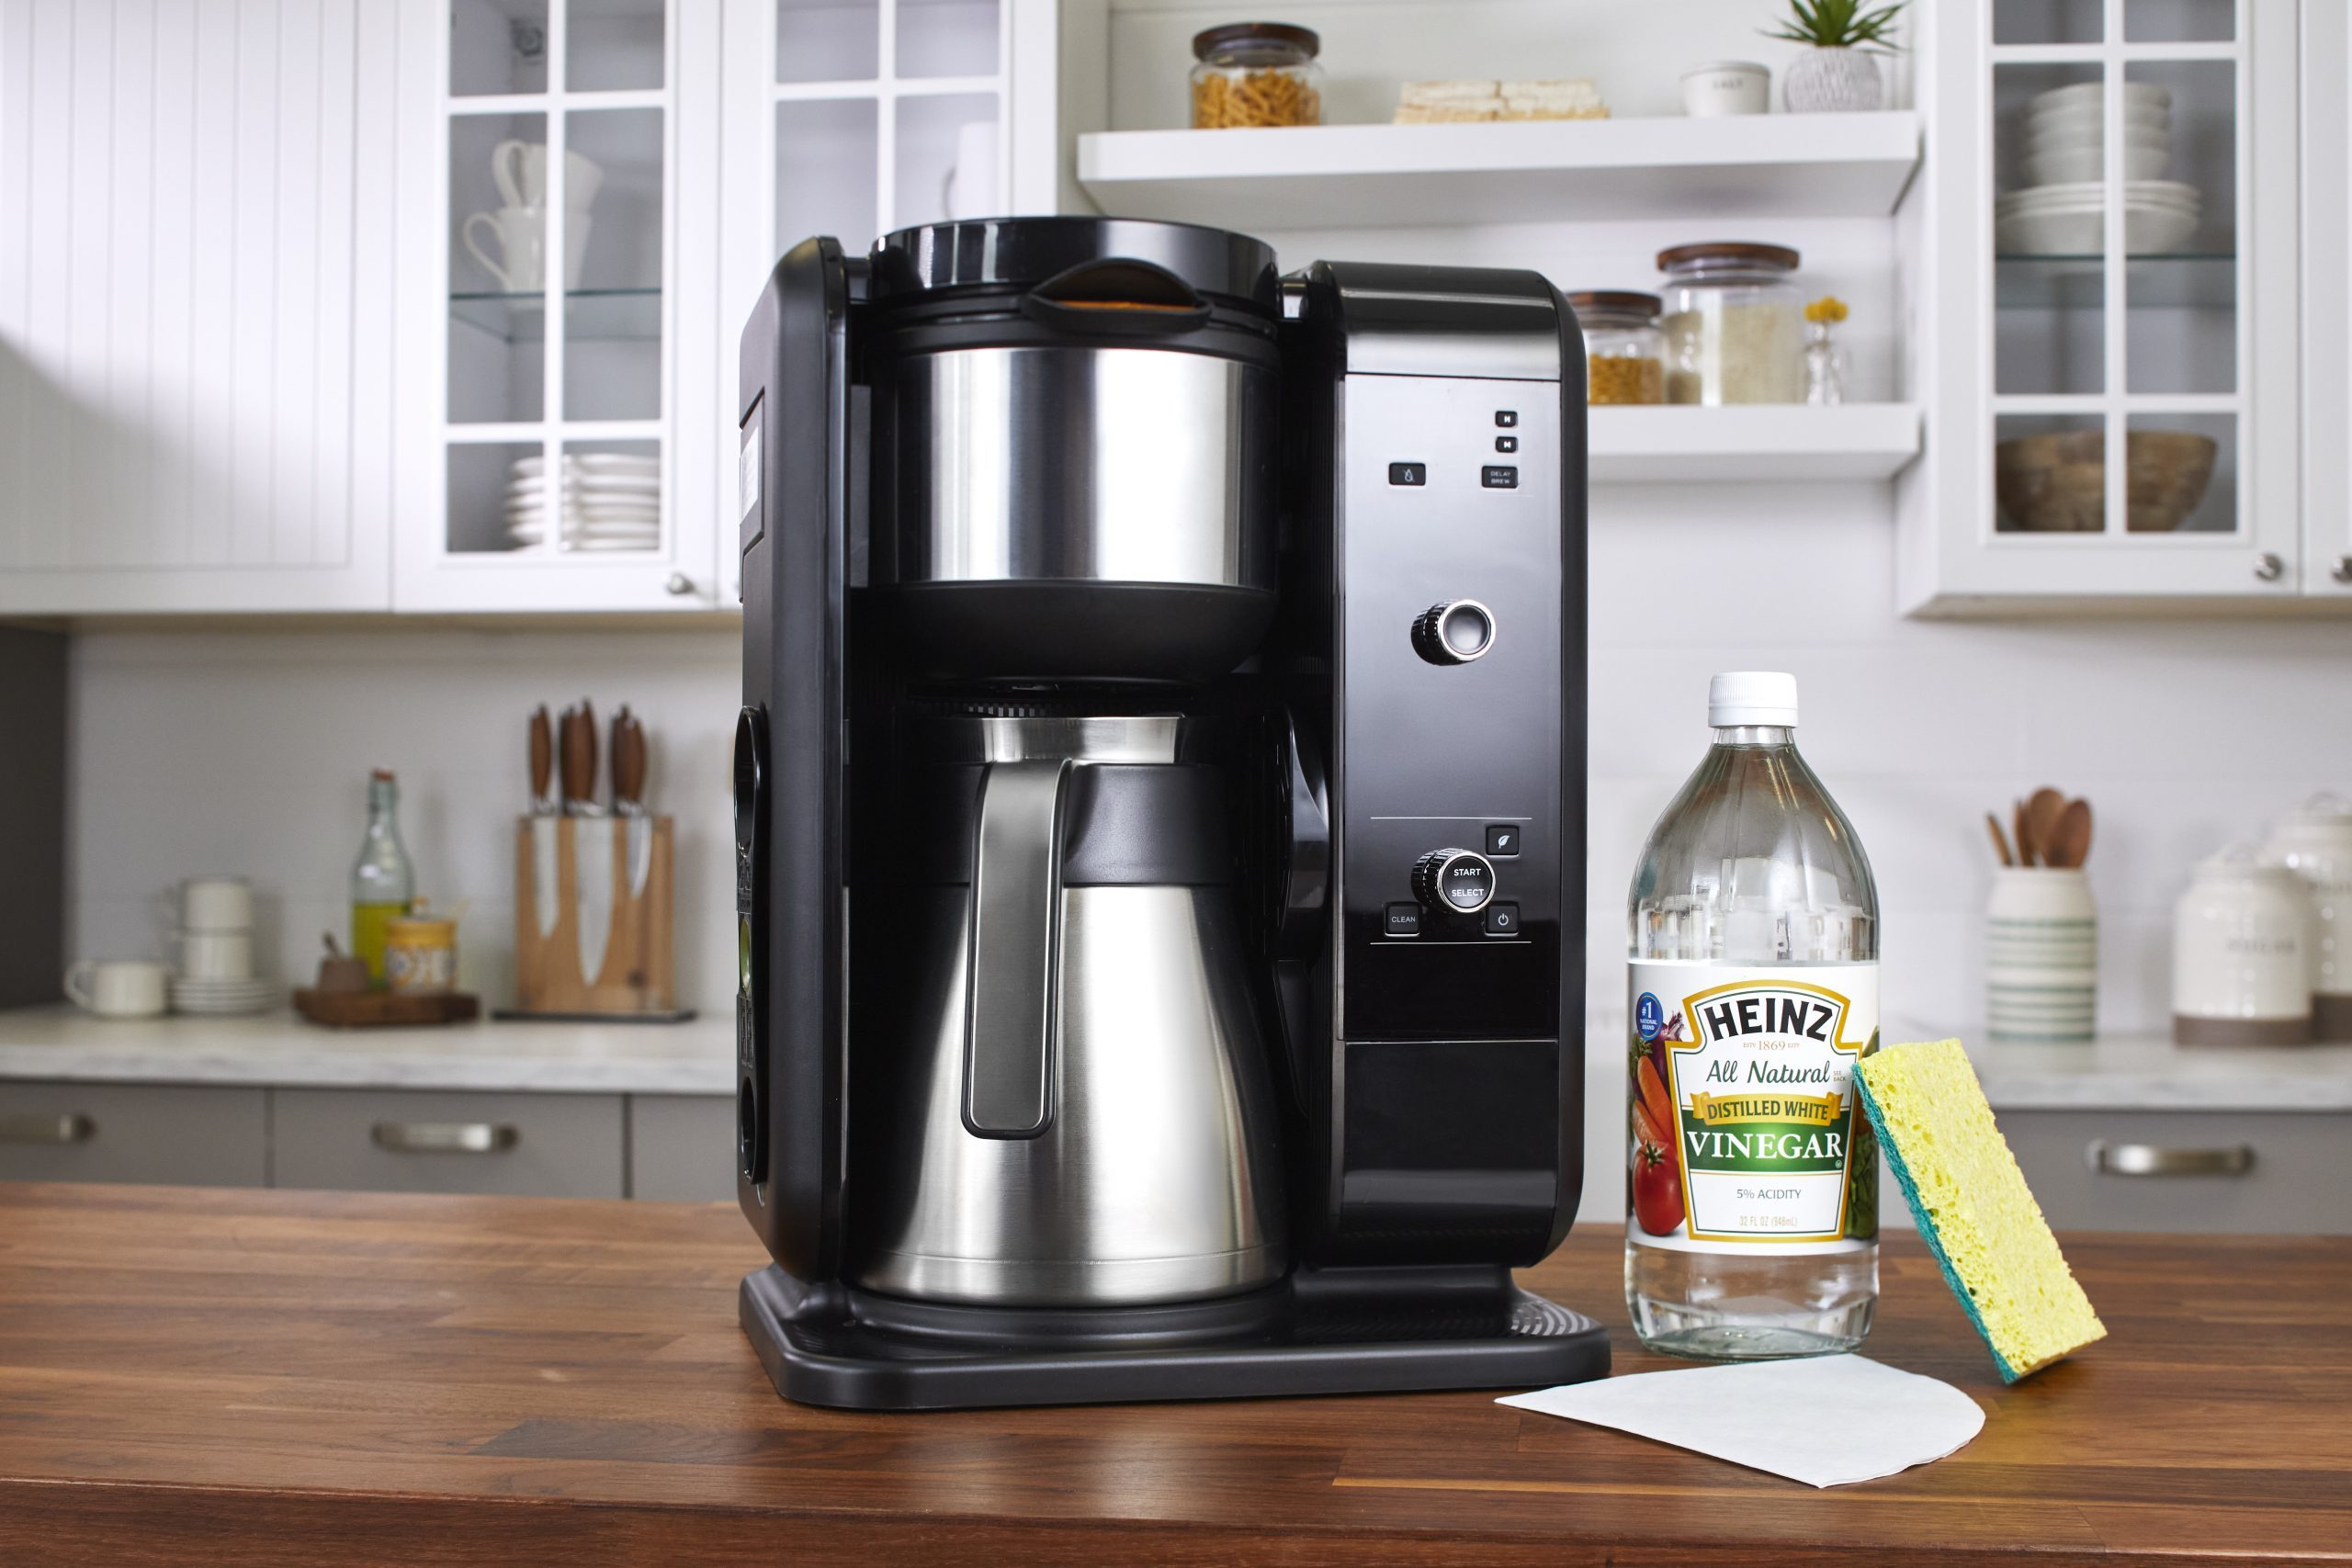 How to Clean a Coffee Maker (Inside and Out)